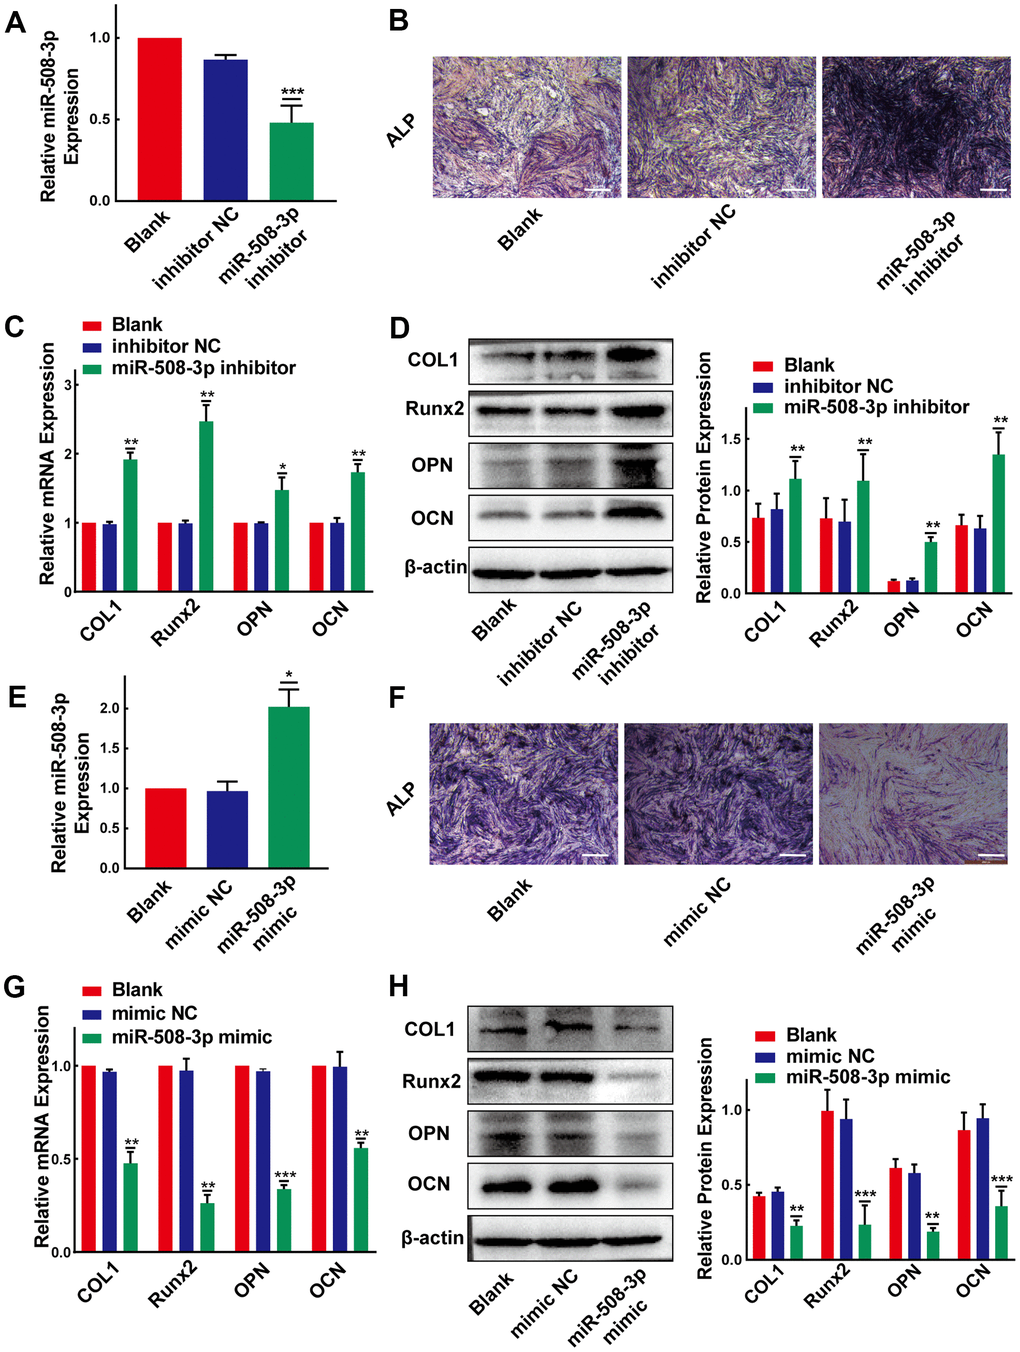 MiR-508-3p suppresses the osteogenic differentiation of PLL cells. (A) The level of miR-508-3p was significantly suppressed after treatment with the miR-508-3p inhibitor compared to treatment with the negative control(n=3). (B) The ALP staining showed that the osteogenic properties of non-OPLL cells were enhanced after treated with miR-508-3p inhibitor. (C, D) An increased expression of osteogenic differentiation-related markers was detected by qRT-PCR and Western Blot(n=3). (E) MiR-508-3p was successfully overexpressed after treated OPLL cells with the miR-508-3p mimic(n=3). (F) The ALP activity of OPLL cells was suppressed by miR-508-3p mimic. (G, H) The expression of osteogenic differentiation-related markers was suppressed at the mRNA and protein levels after transfection with the miR-508-3p mimic versus the negative control(n=3). All tests were conducted at least three times. Data are expressed as the mean ± SD. *P 